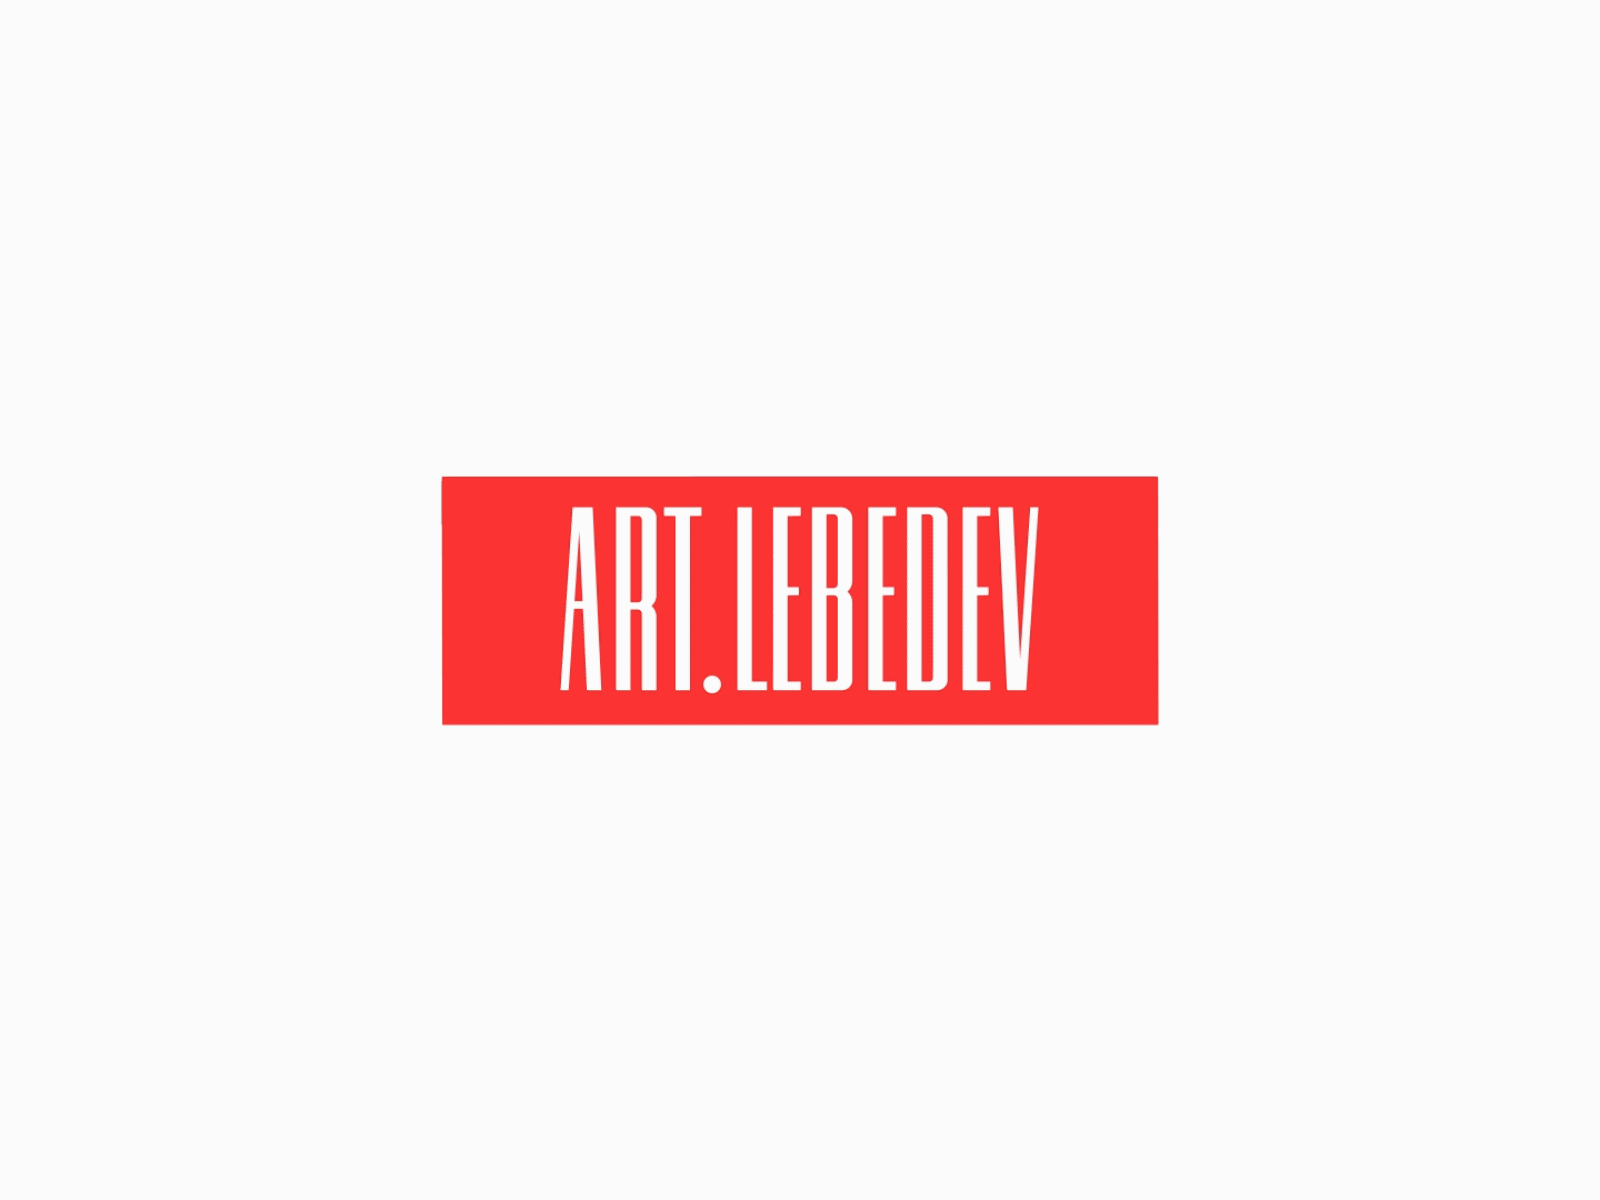 Animated logo for artlebedev studio animated logo animation art logo logo animation logotype motion design motion graphic motiongraphics red sign vector